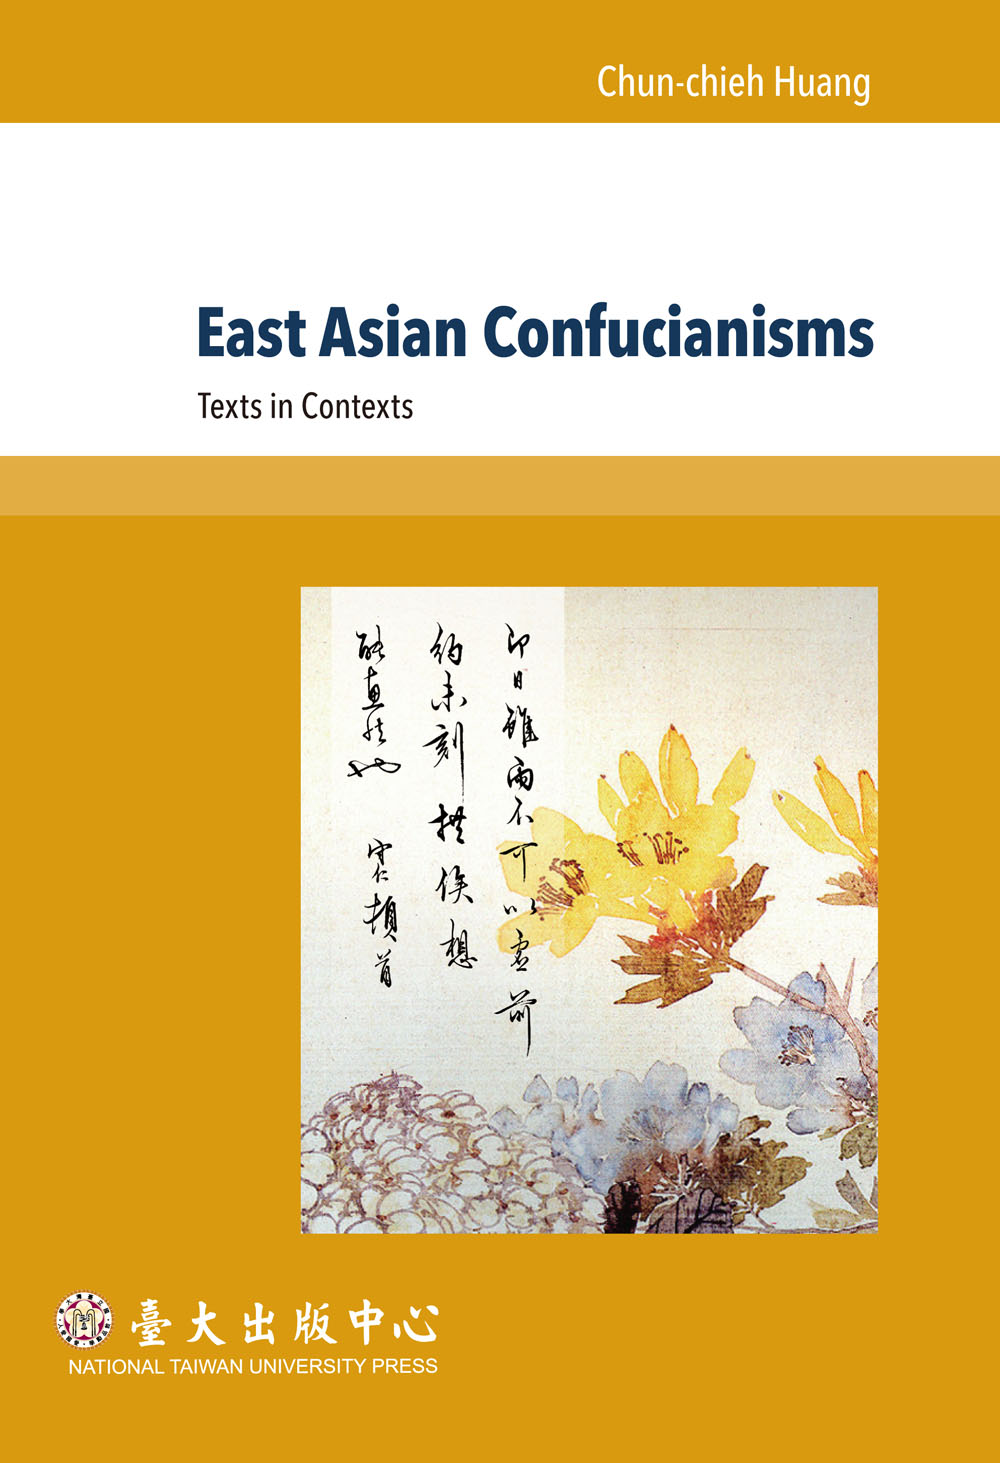 East Asian Confucianisms: Texts in Contexts